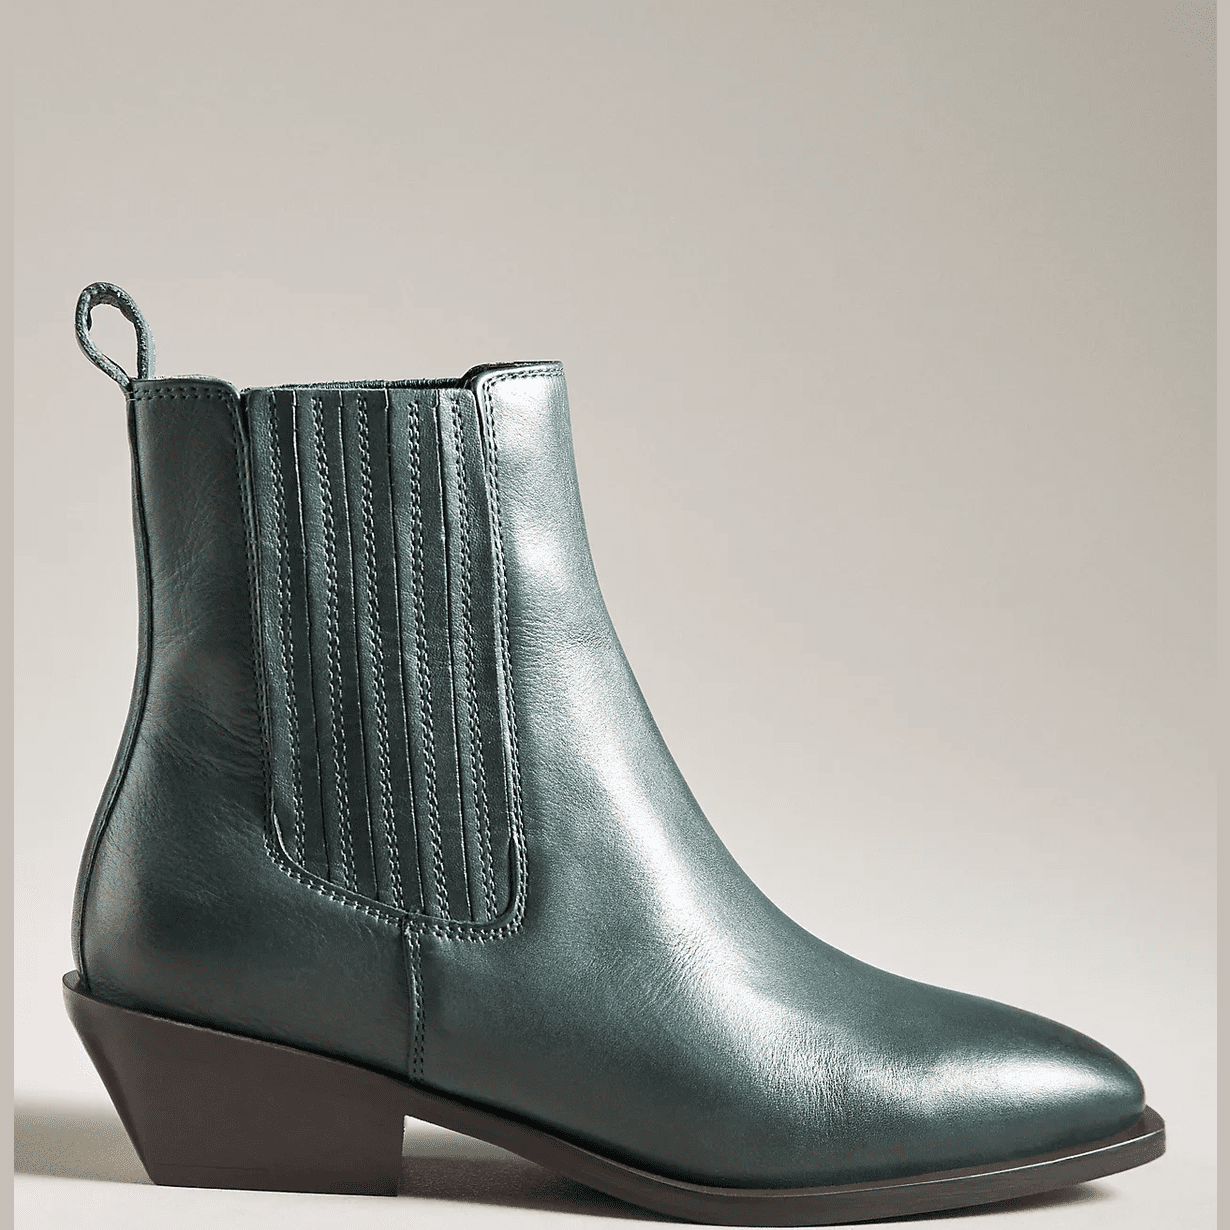 Seychelles Hold Me Down Boots in Green - Jaunts Boutique 